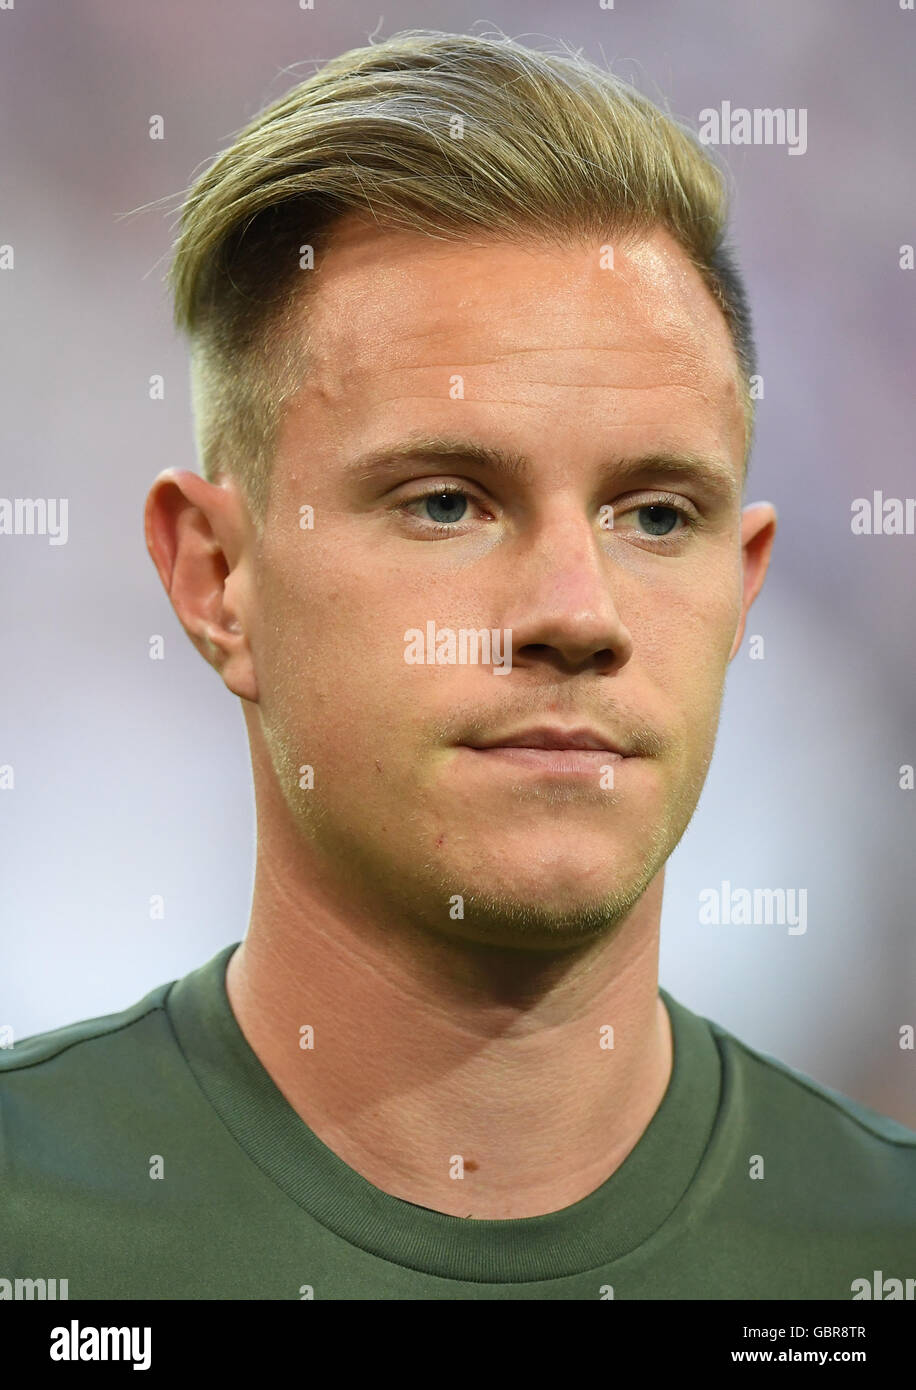 Germany's goalkeeper Marc-Andre ter Stegen before the UEFA EURO 2016 semi final soccer match between Germany and France at the Stade Velodrome in Marseille, France, 07 July 2016. Photo: Peter Kneffel/dpa (RESTRICTIONS APPLY: For editorial news reporting purposes only. Not used for commercial or marketing purposes without prior written approval of UEFA. Images must appear as still images and must not emulate match action video footage. Photographs published in online publications (whether via the Internet or otherwise) shall have an interval of at least 20 seconds between the posting.) Stock Photo